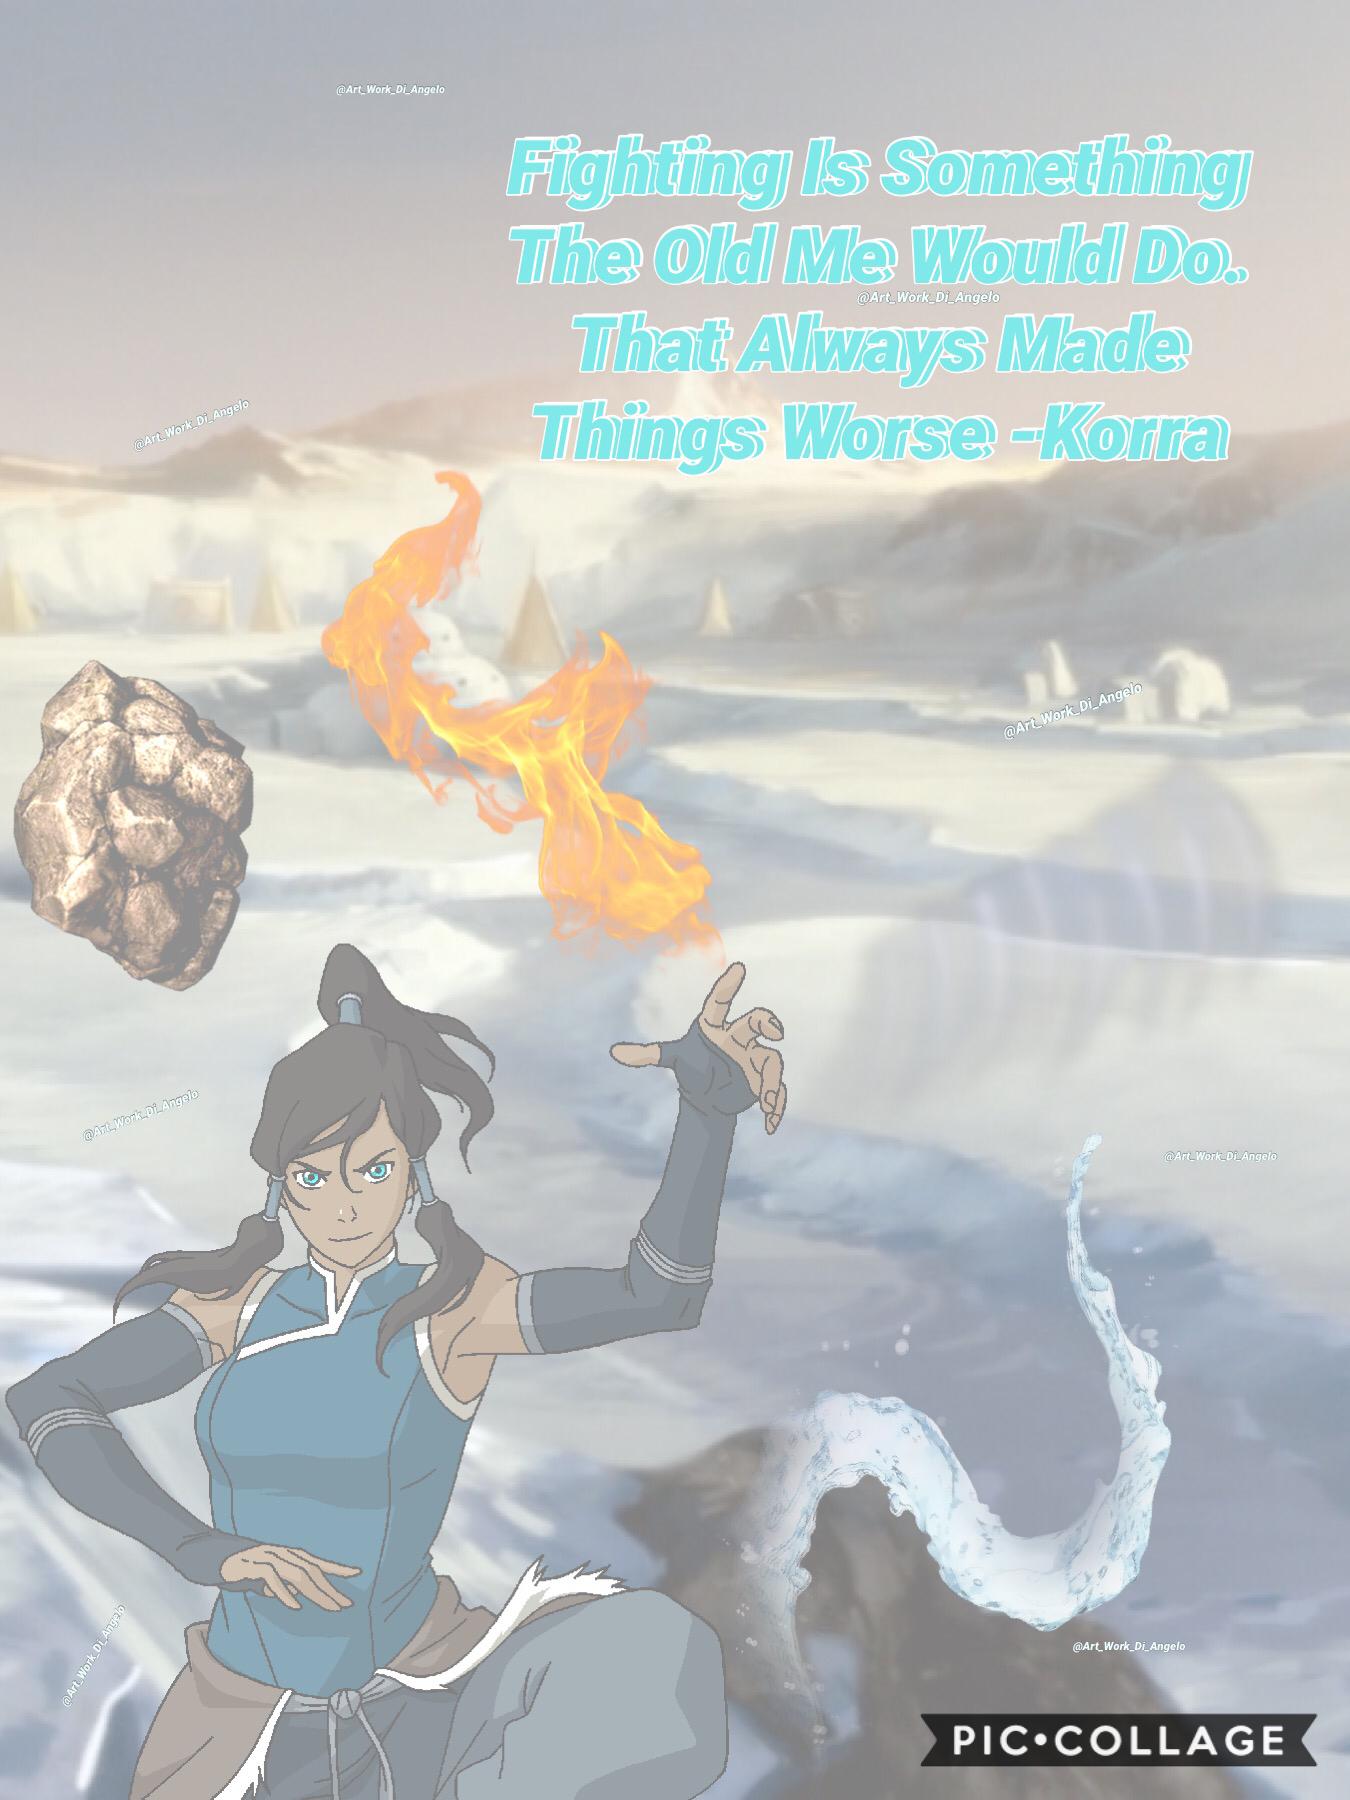 Here’s Korra!!! And happy New Years!!!!